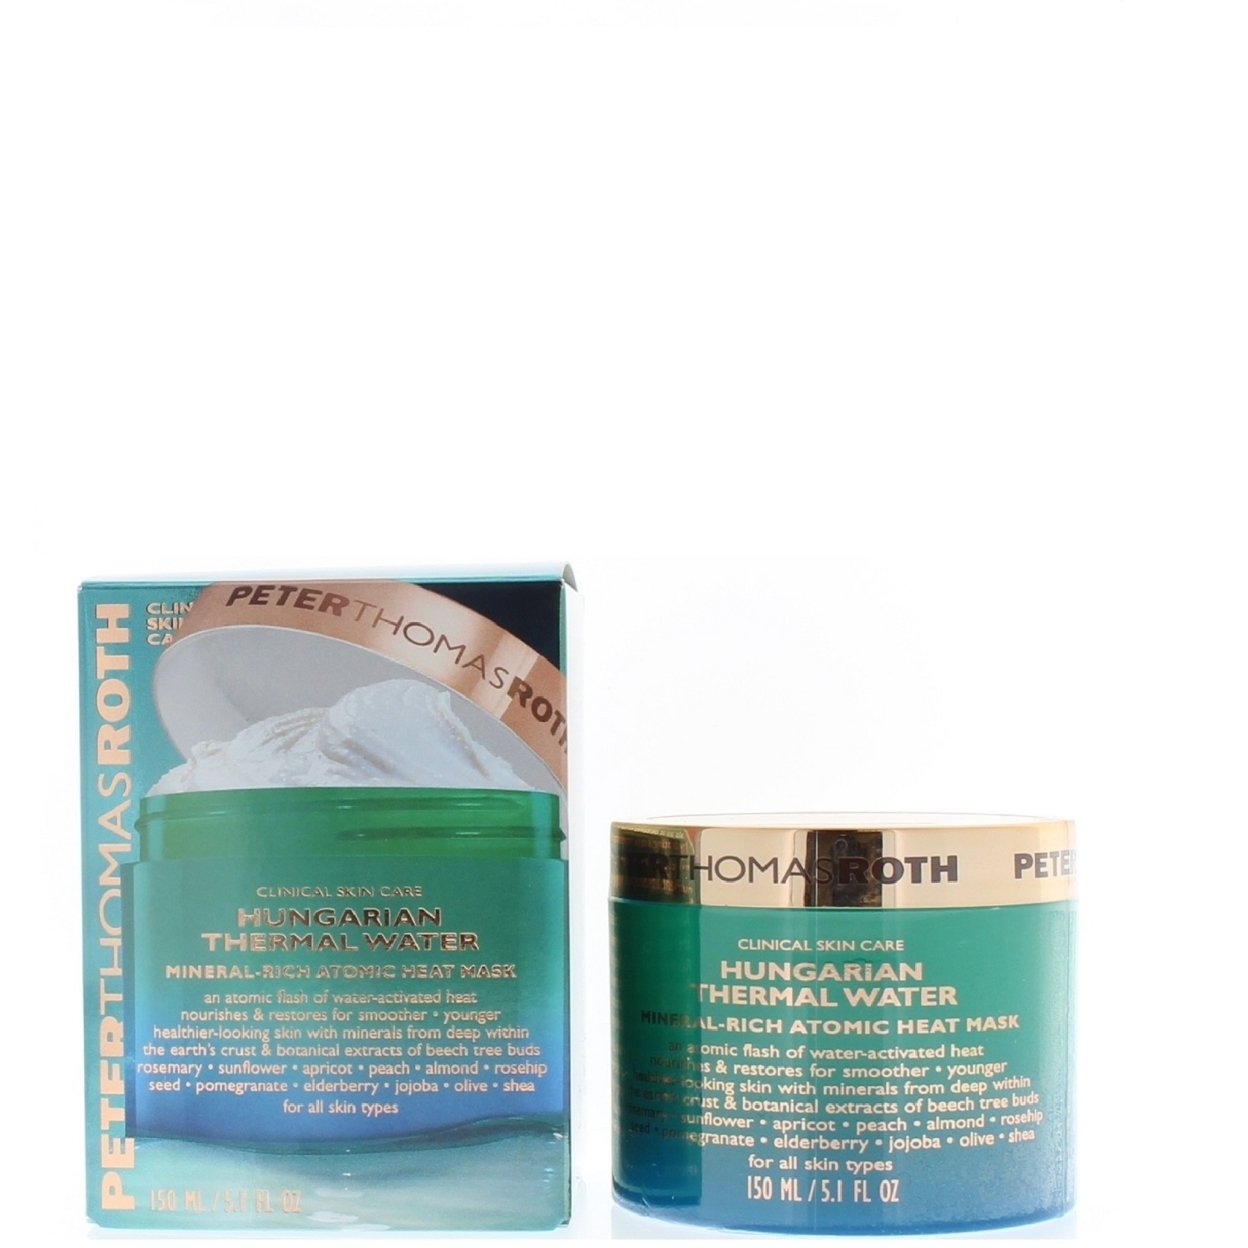 Peter Thomas Roth Hungarian Thermal Water Mineral Rich Atomic Heat Mask 5.1 oz - image 1 of 8